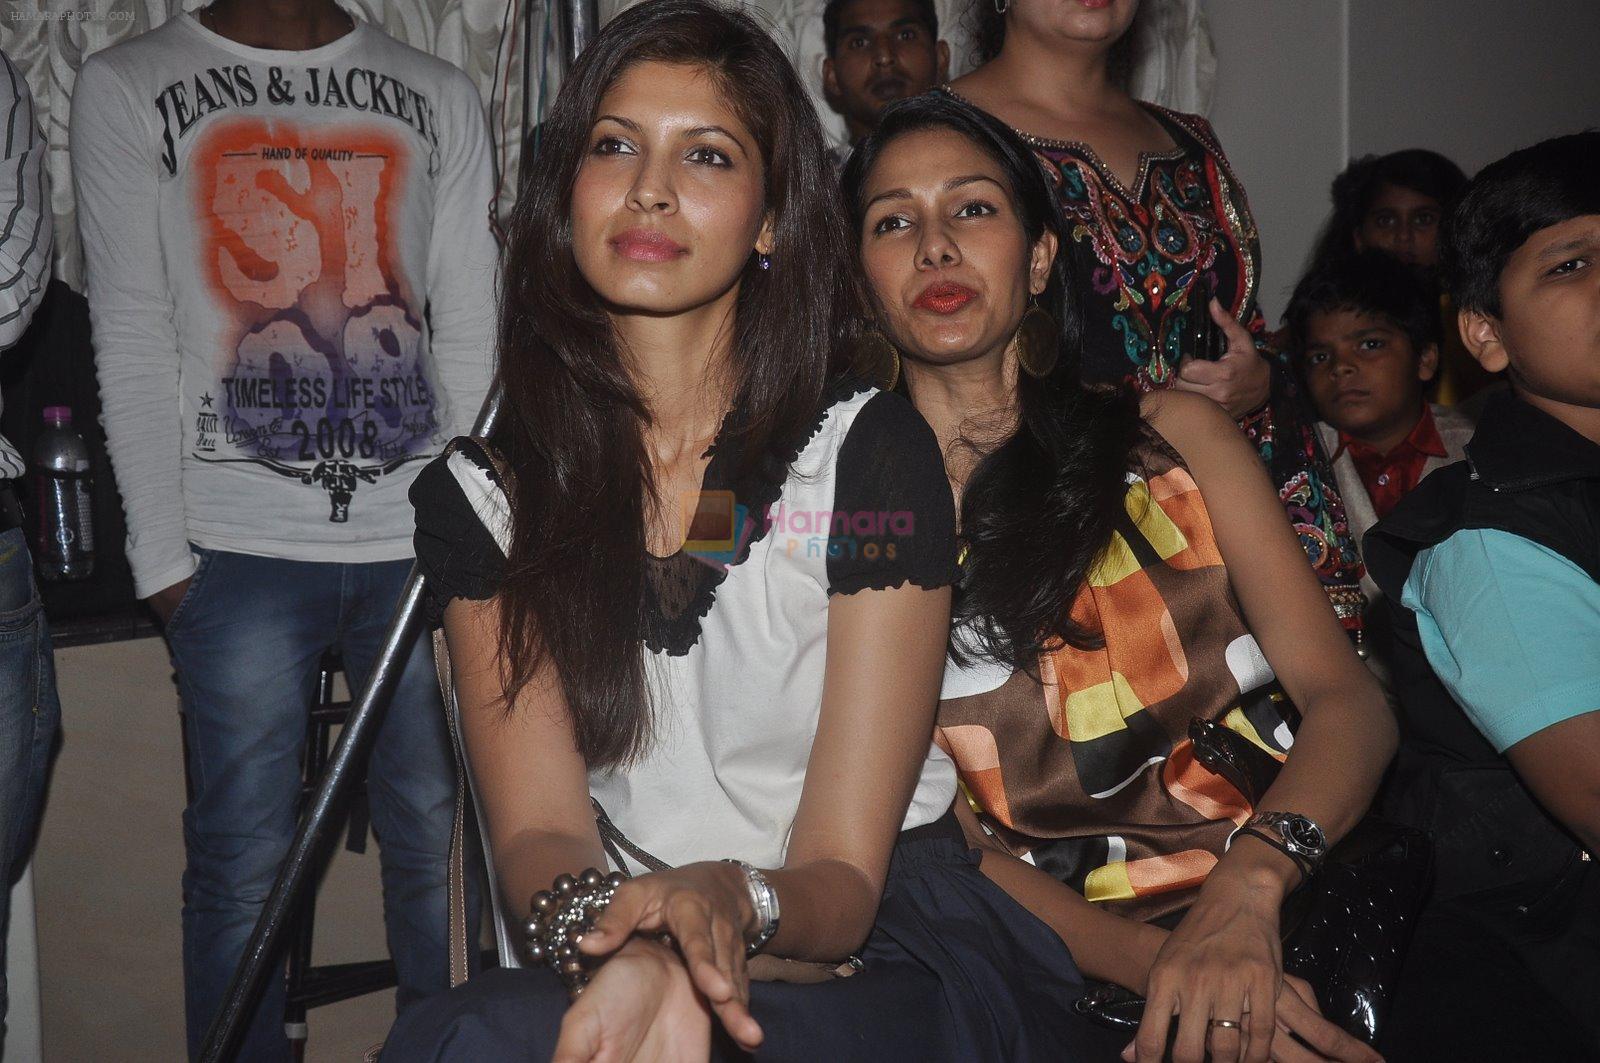 Nethra Raghuraman and Fleur Xavier at the First Look and Music Launch of the film Take It Easy in Andheri, Mumbai on 5th Nov 2014